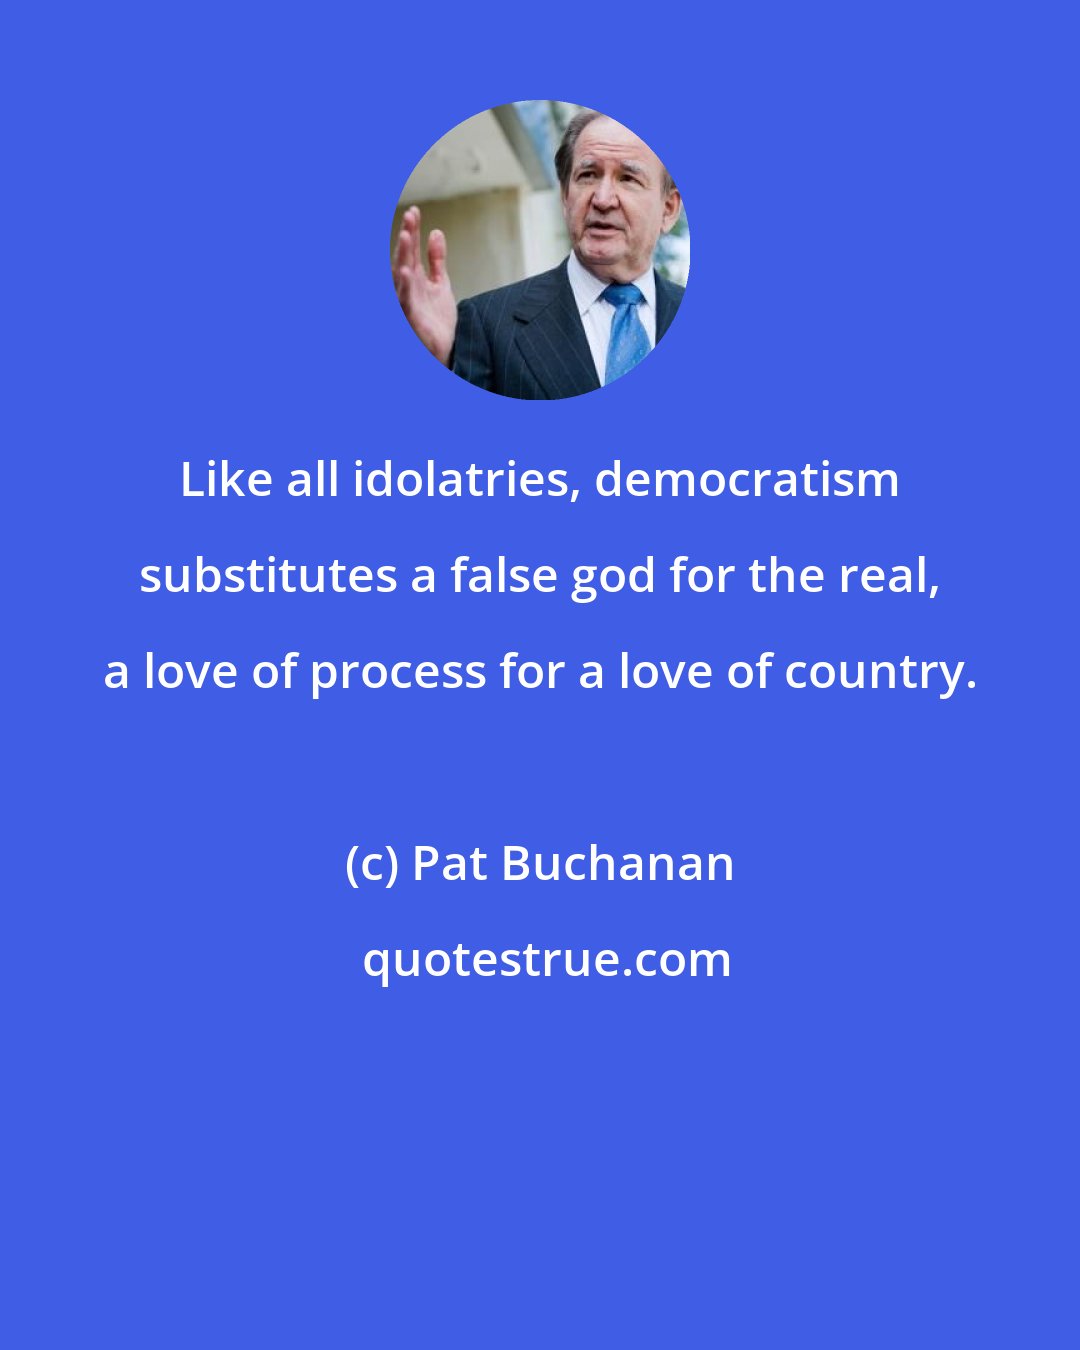 Pat Buchanan: Like all idolatries, democratism substitutes a false god for the real, a love of process for a love of country.